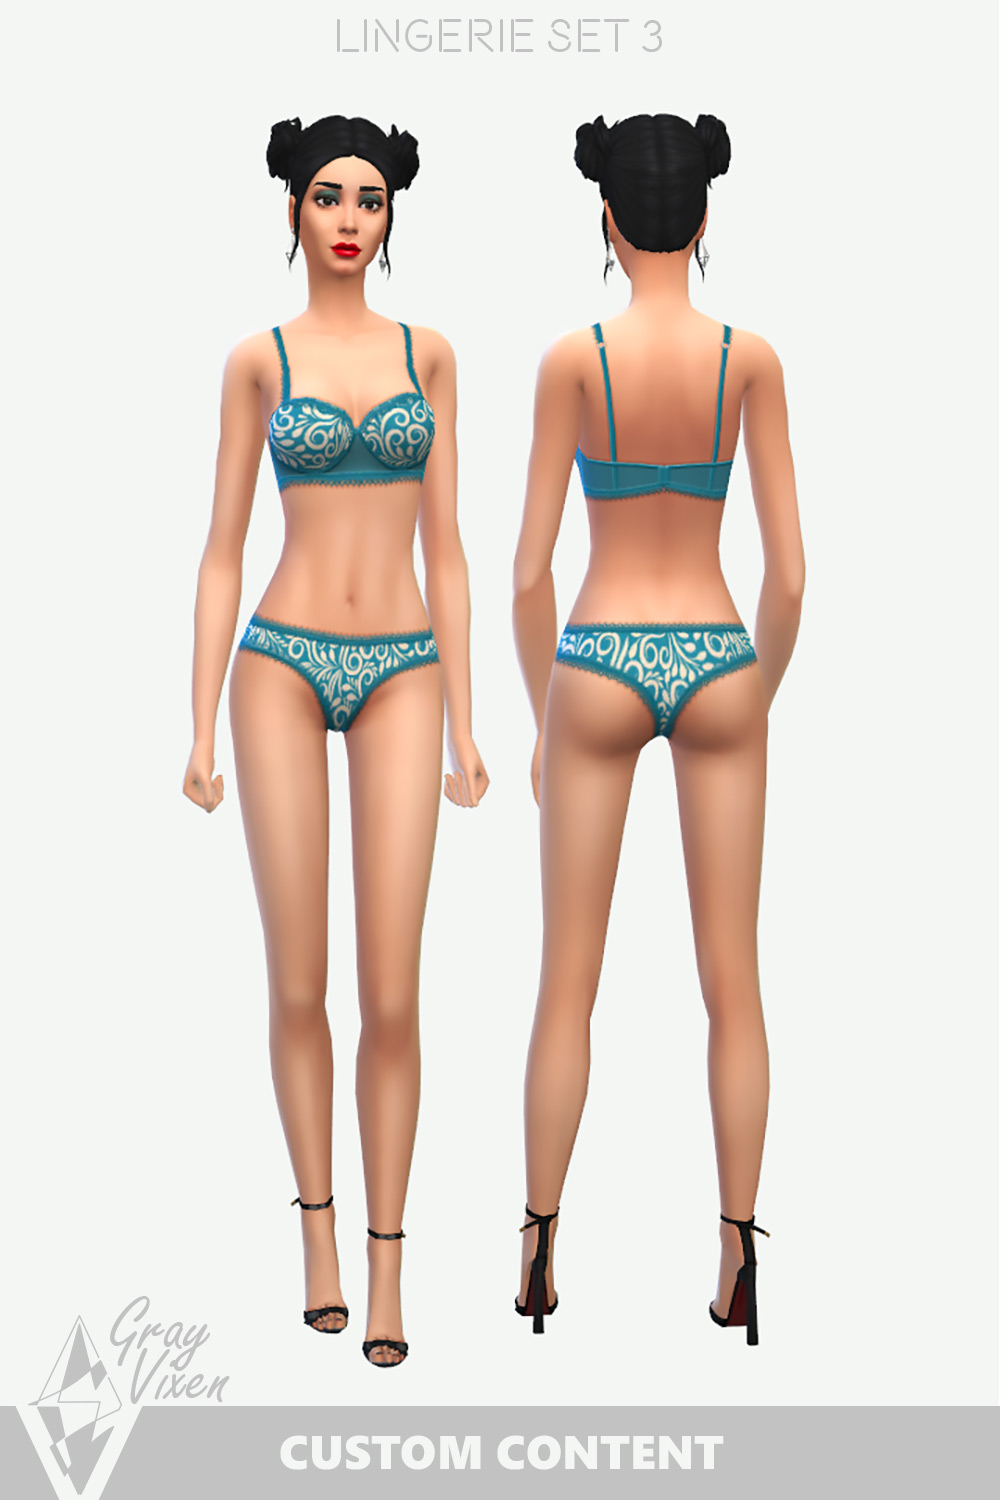 The Sims 4 Lingerie Set Bra and Panty